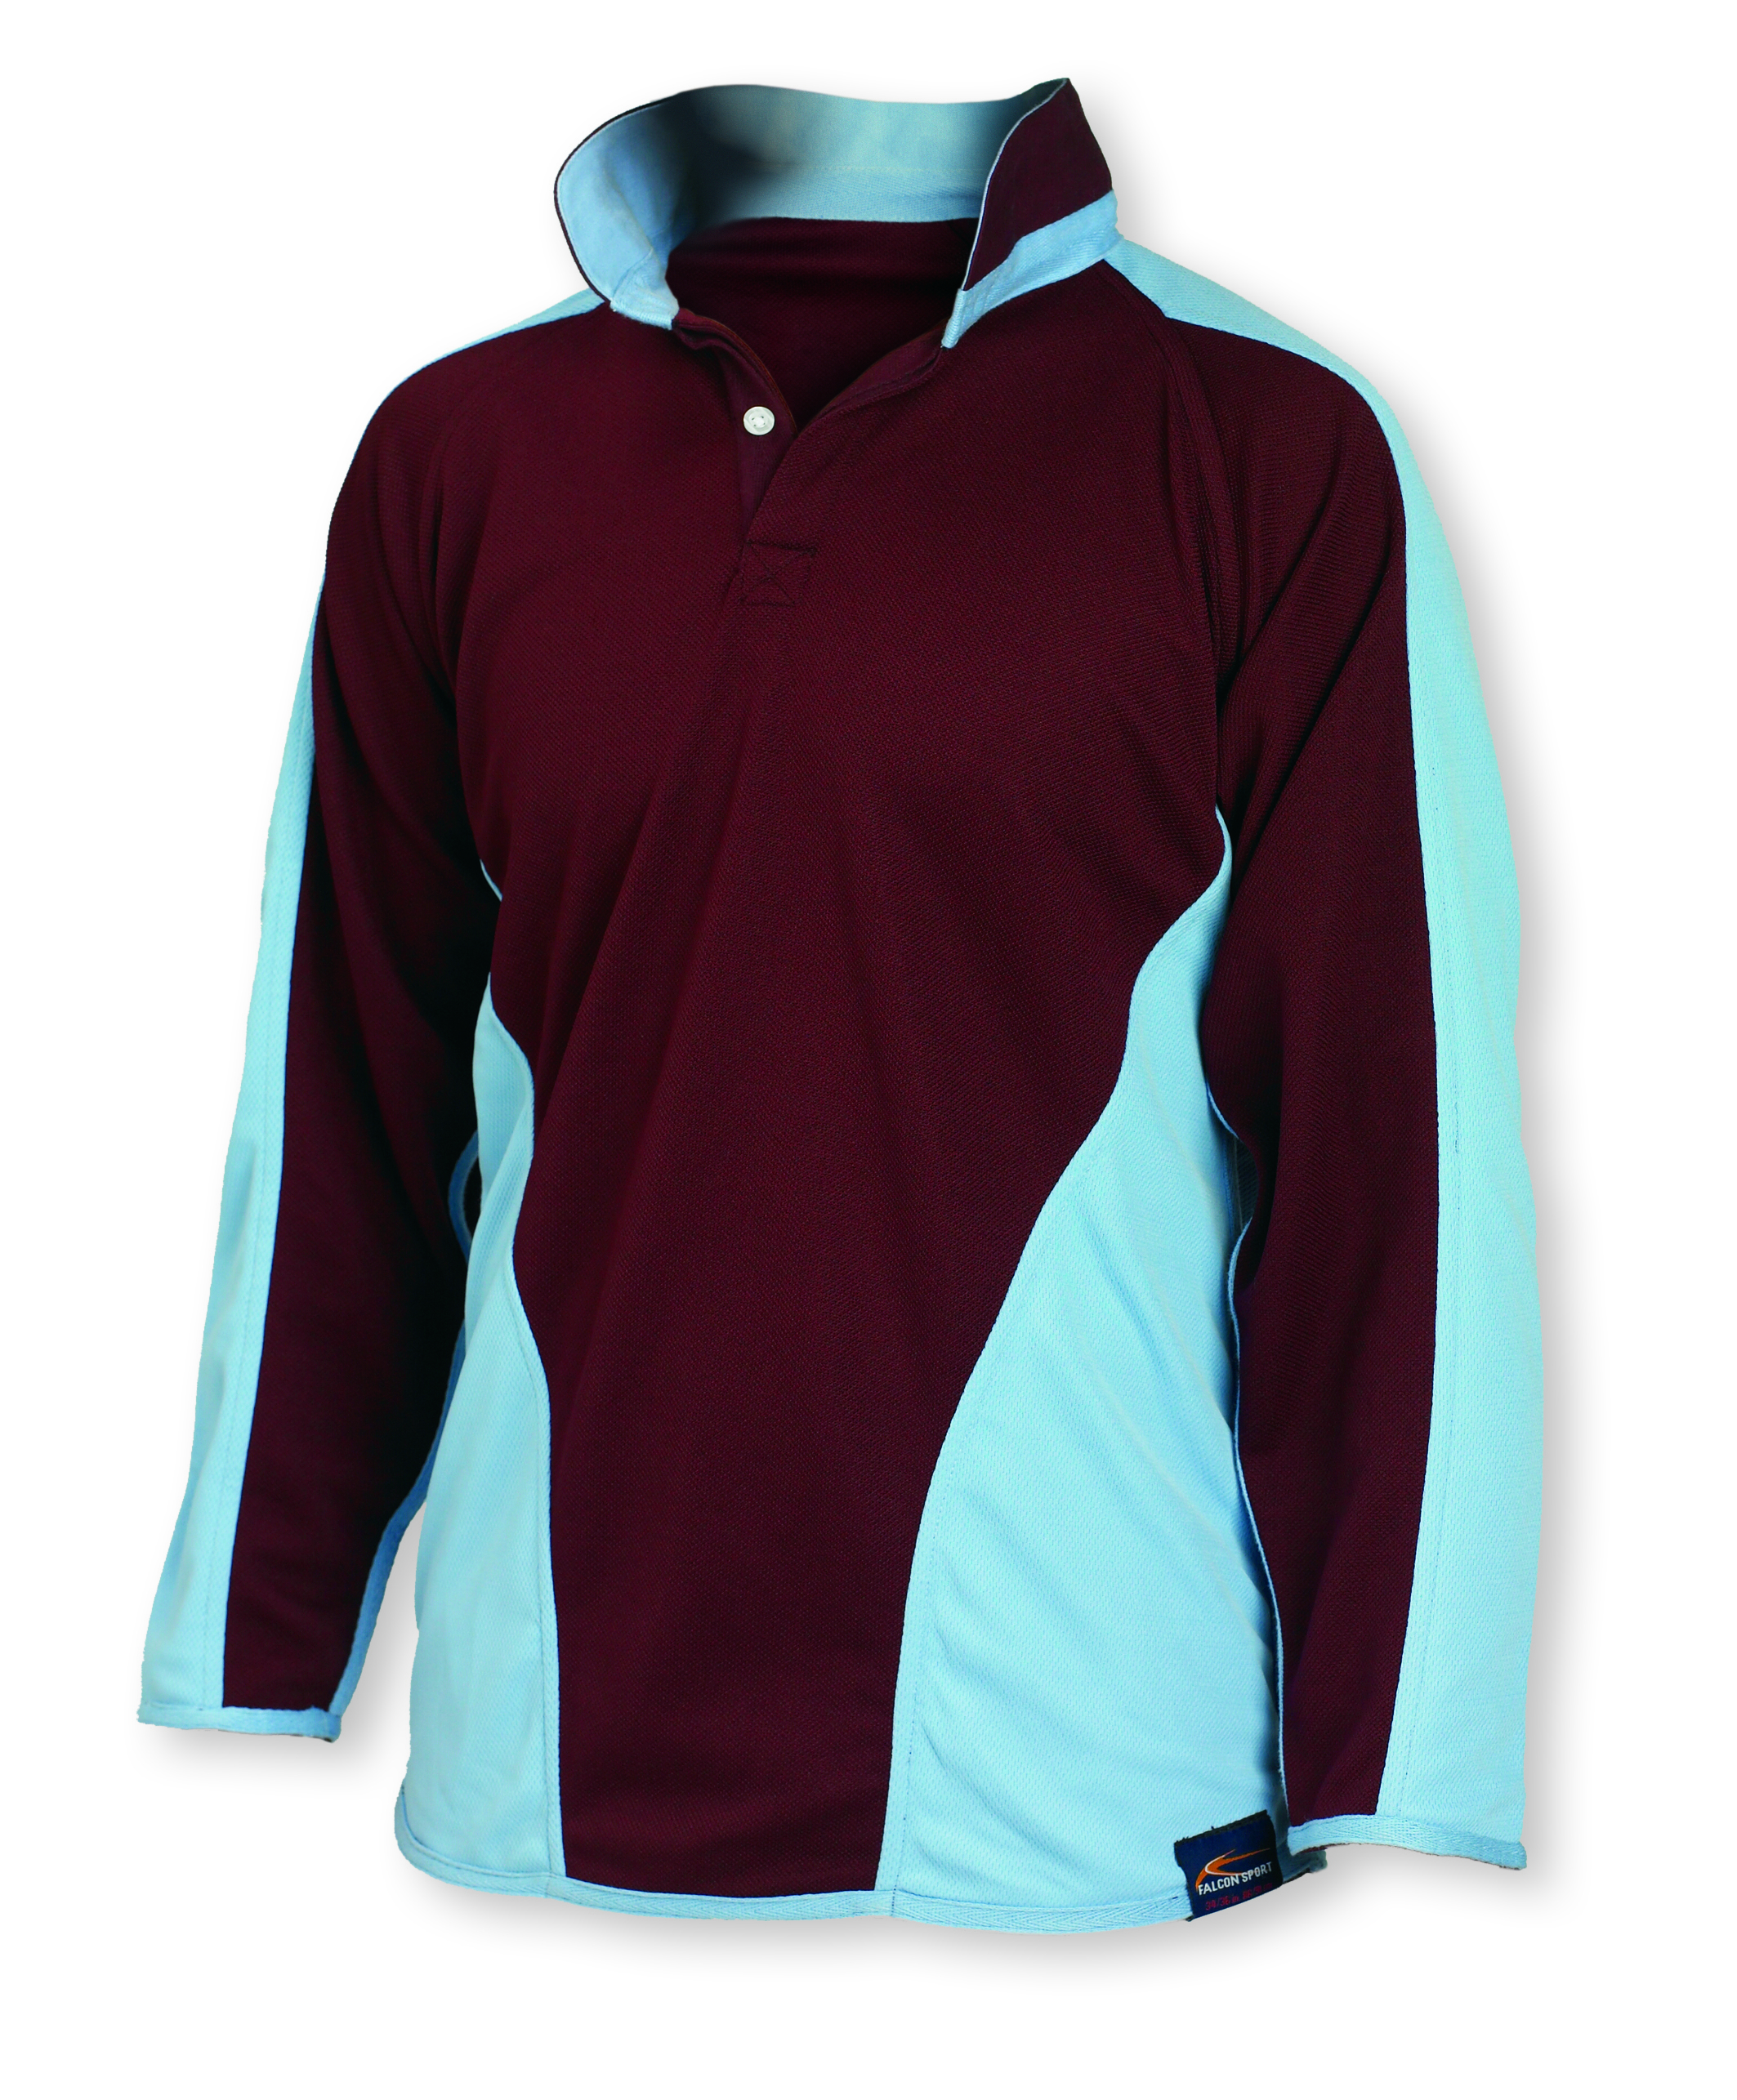 Falcon Fully Reversible Sports Top